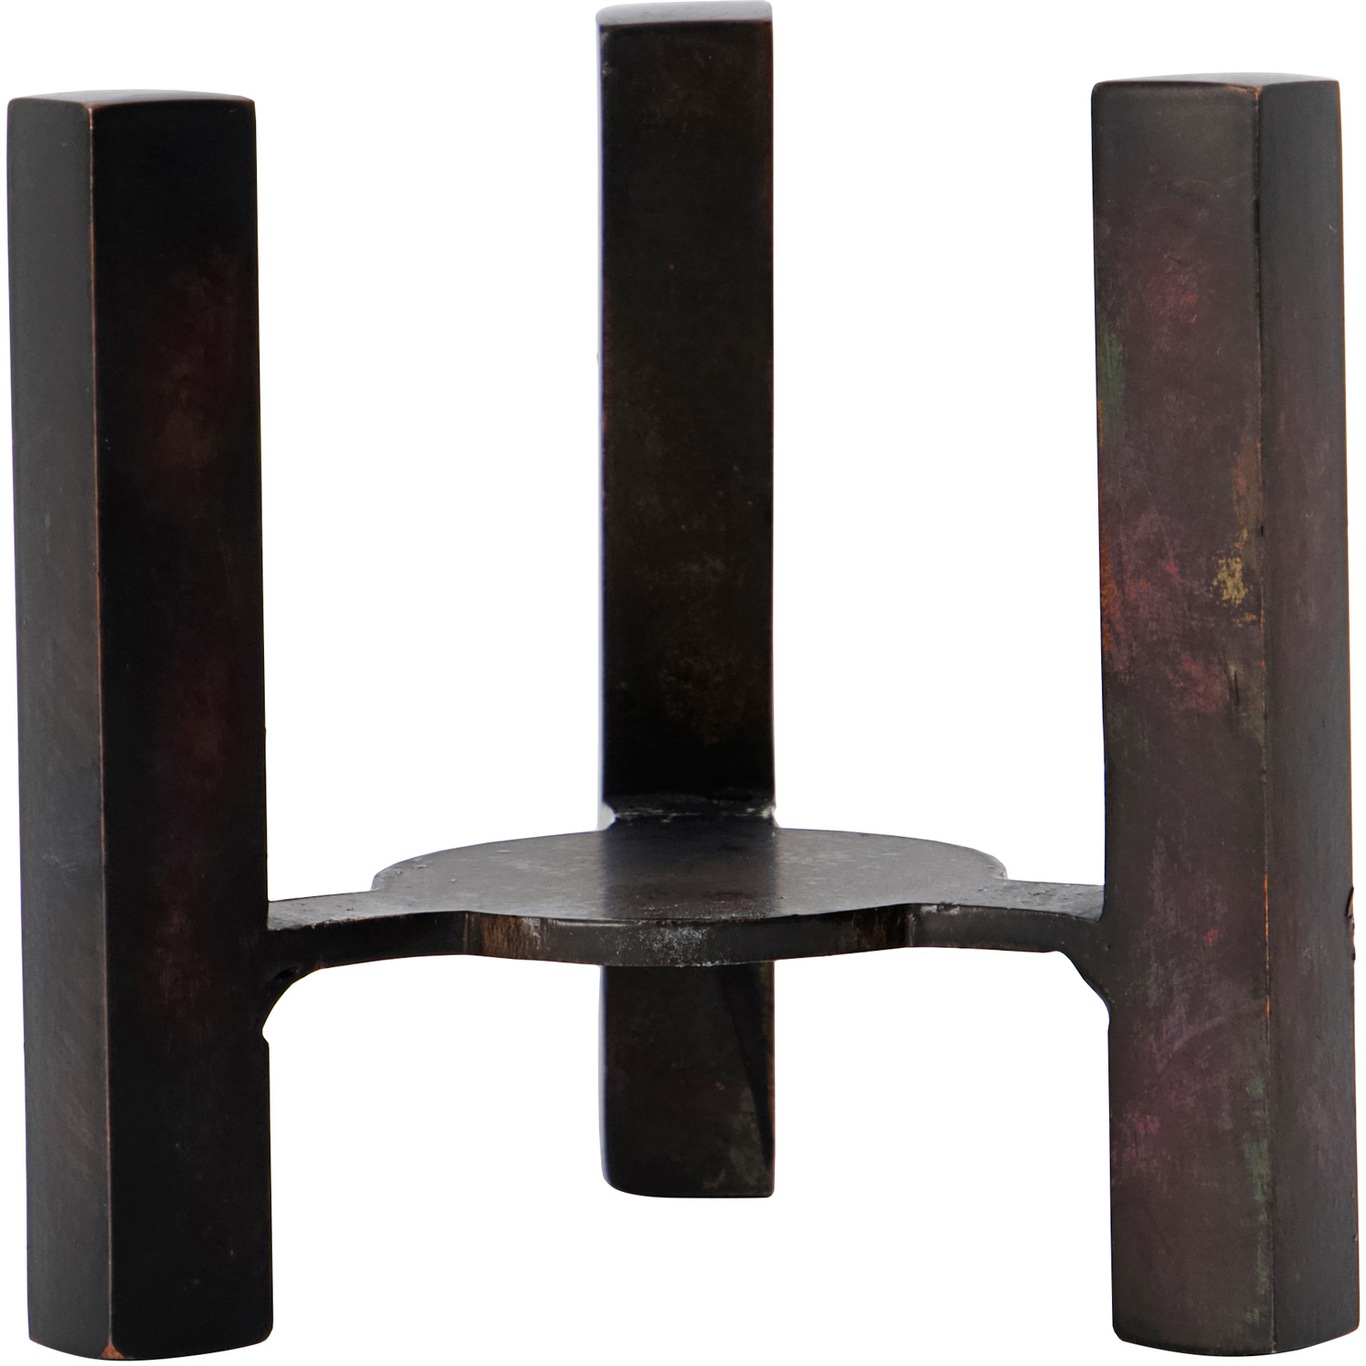 Bejo Candle Stand Antique Brown, 8x7x8 cm